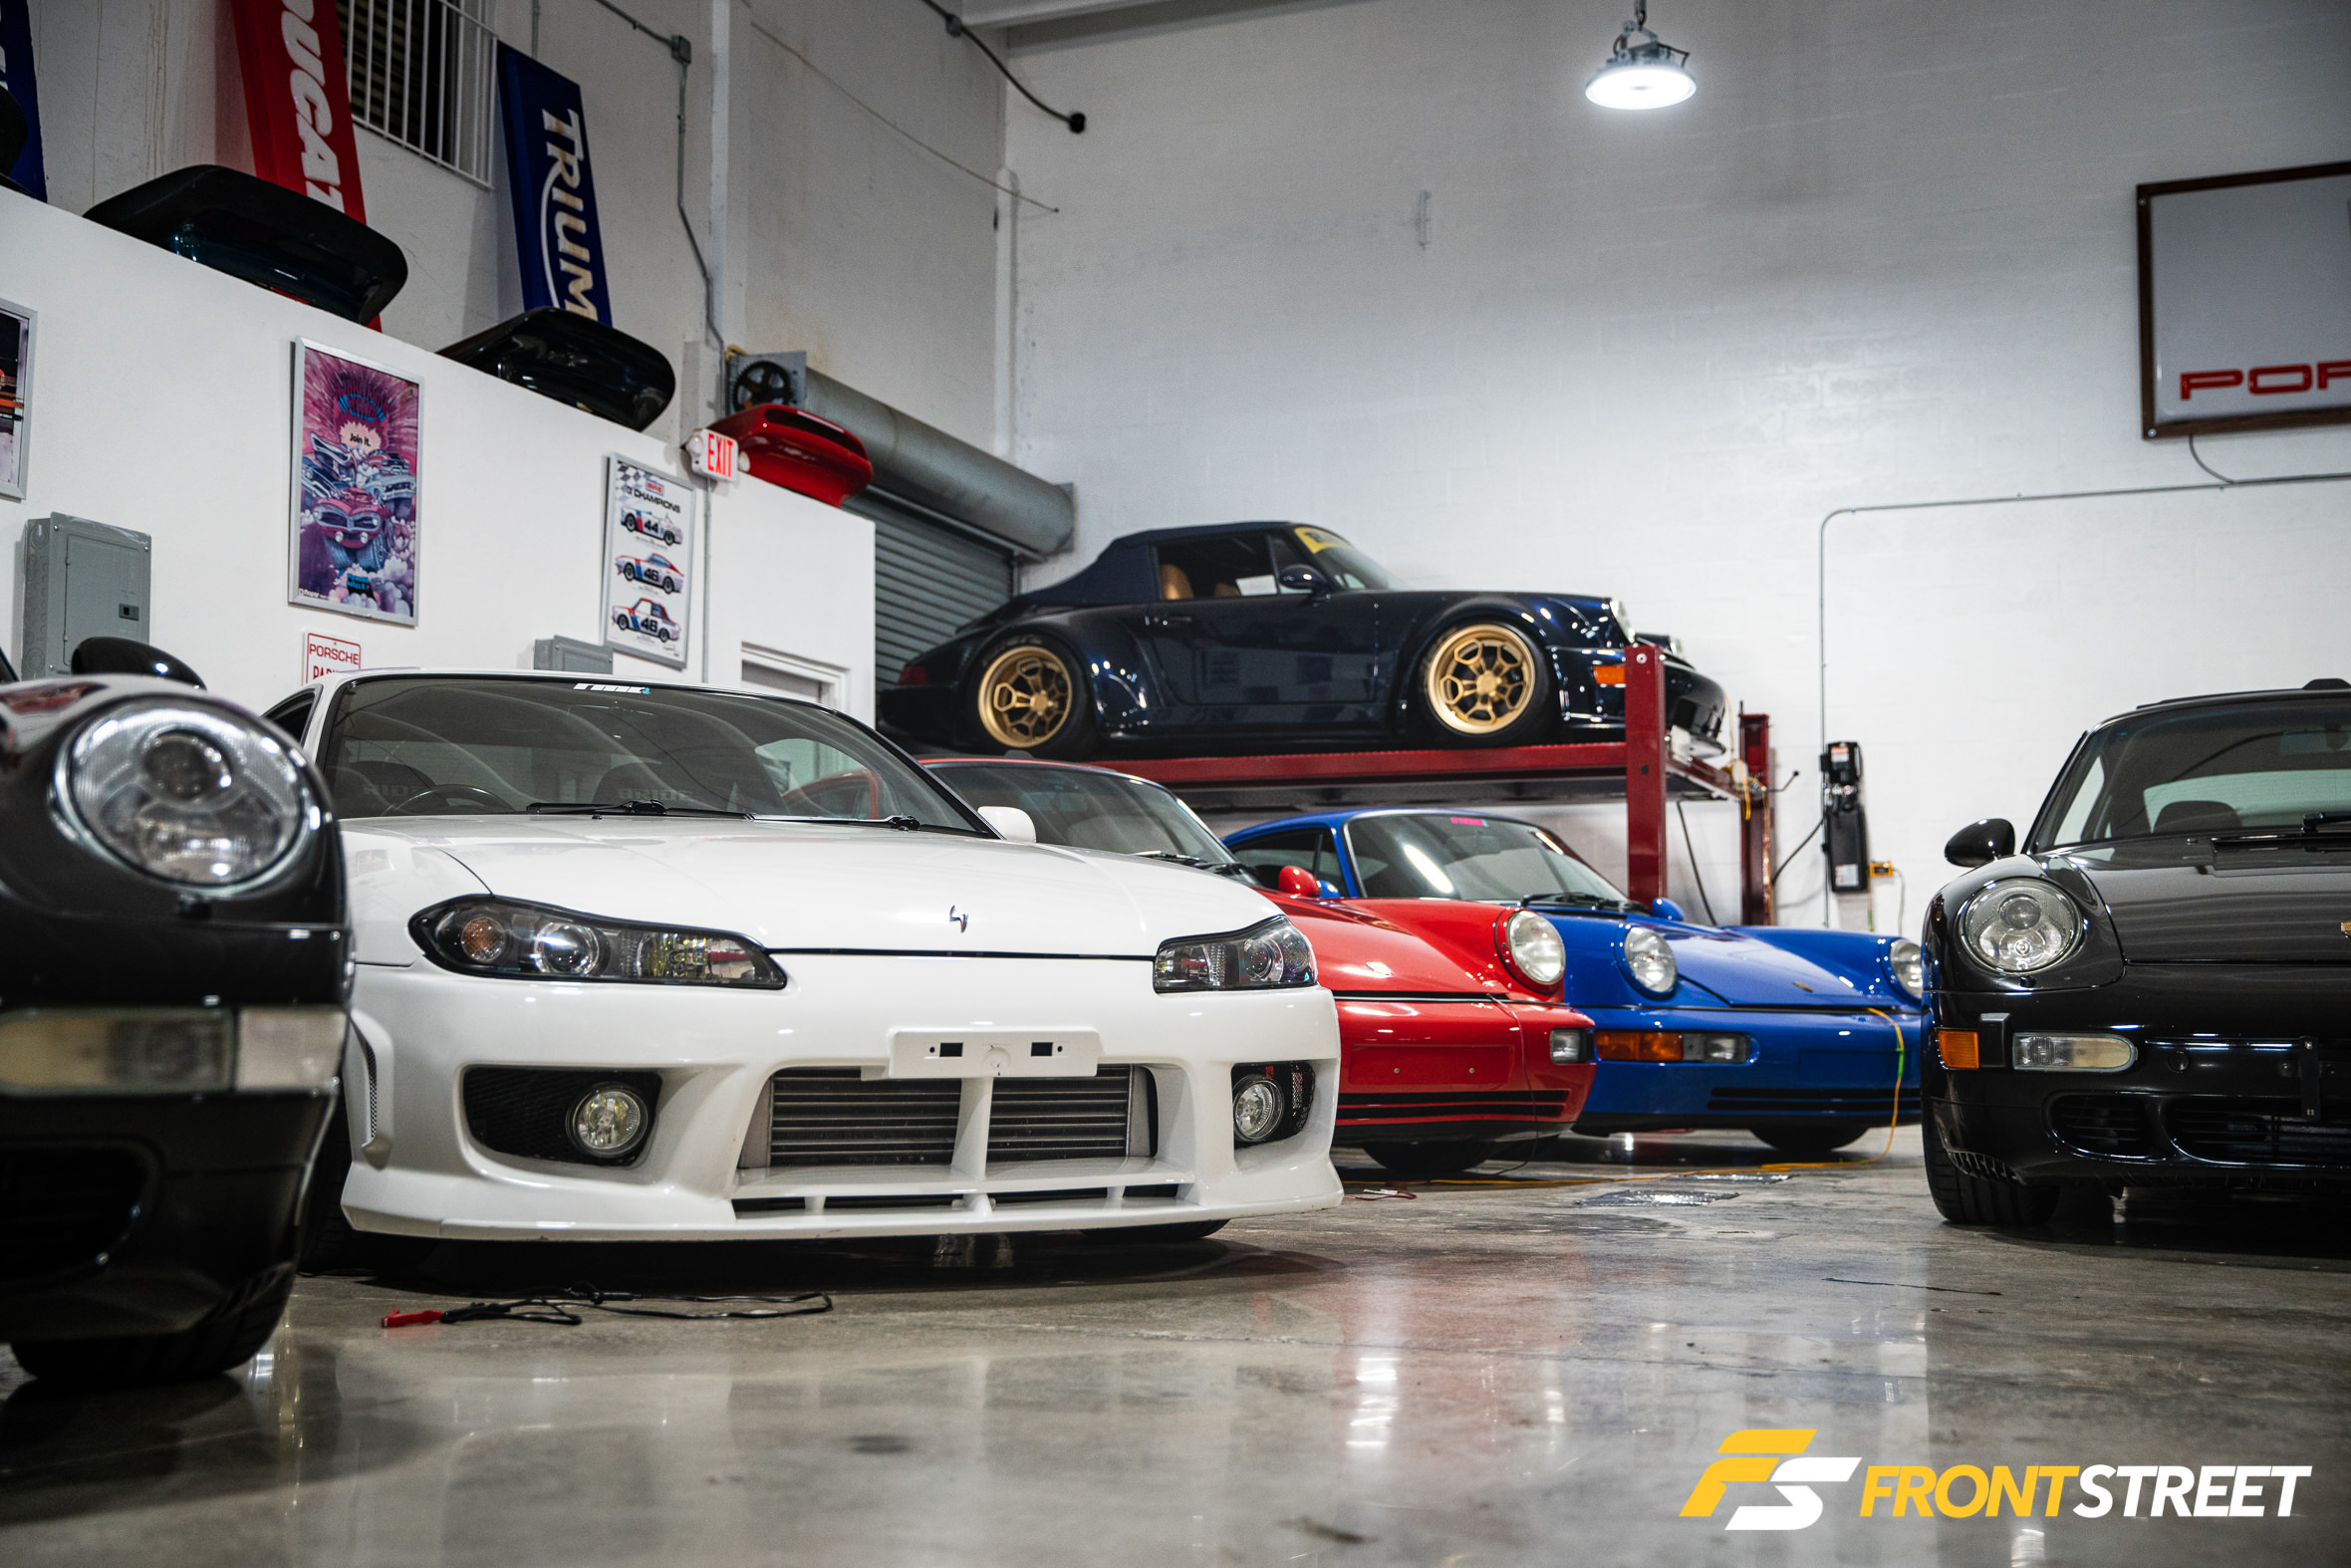 Packing Heat: Visiting The Hot Rod Drivers Of RMC Miami